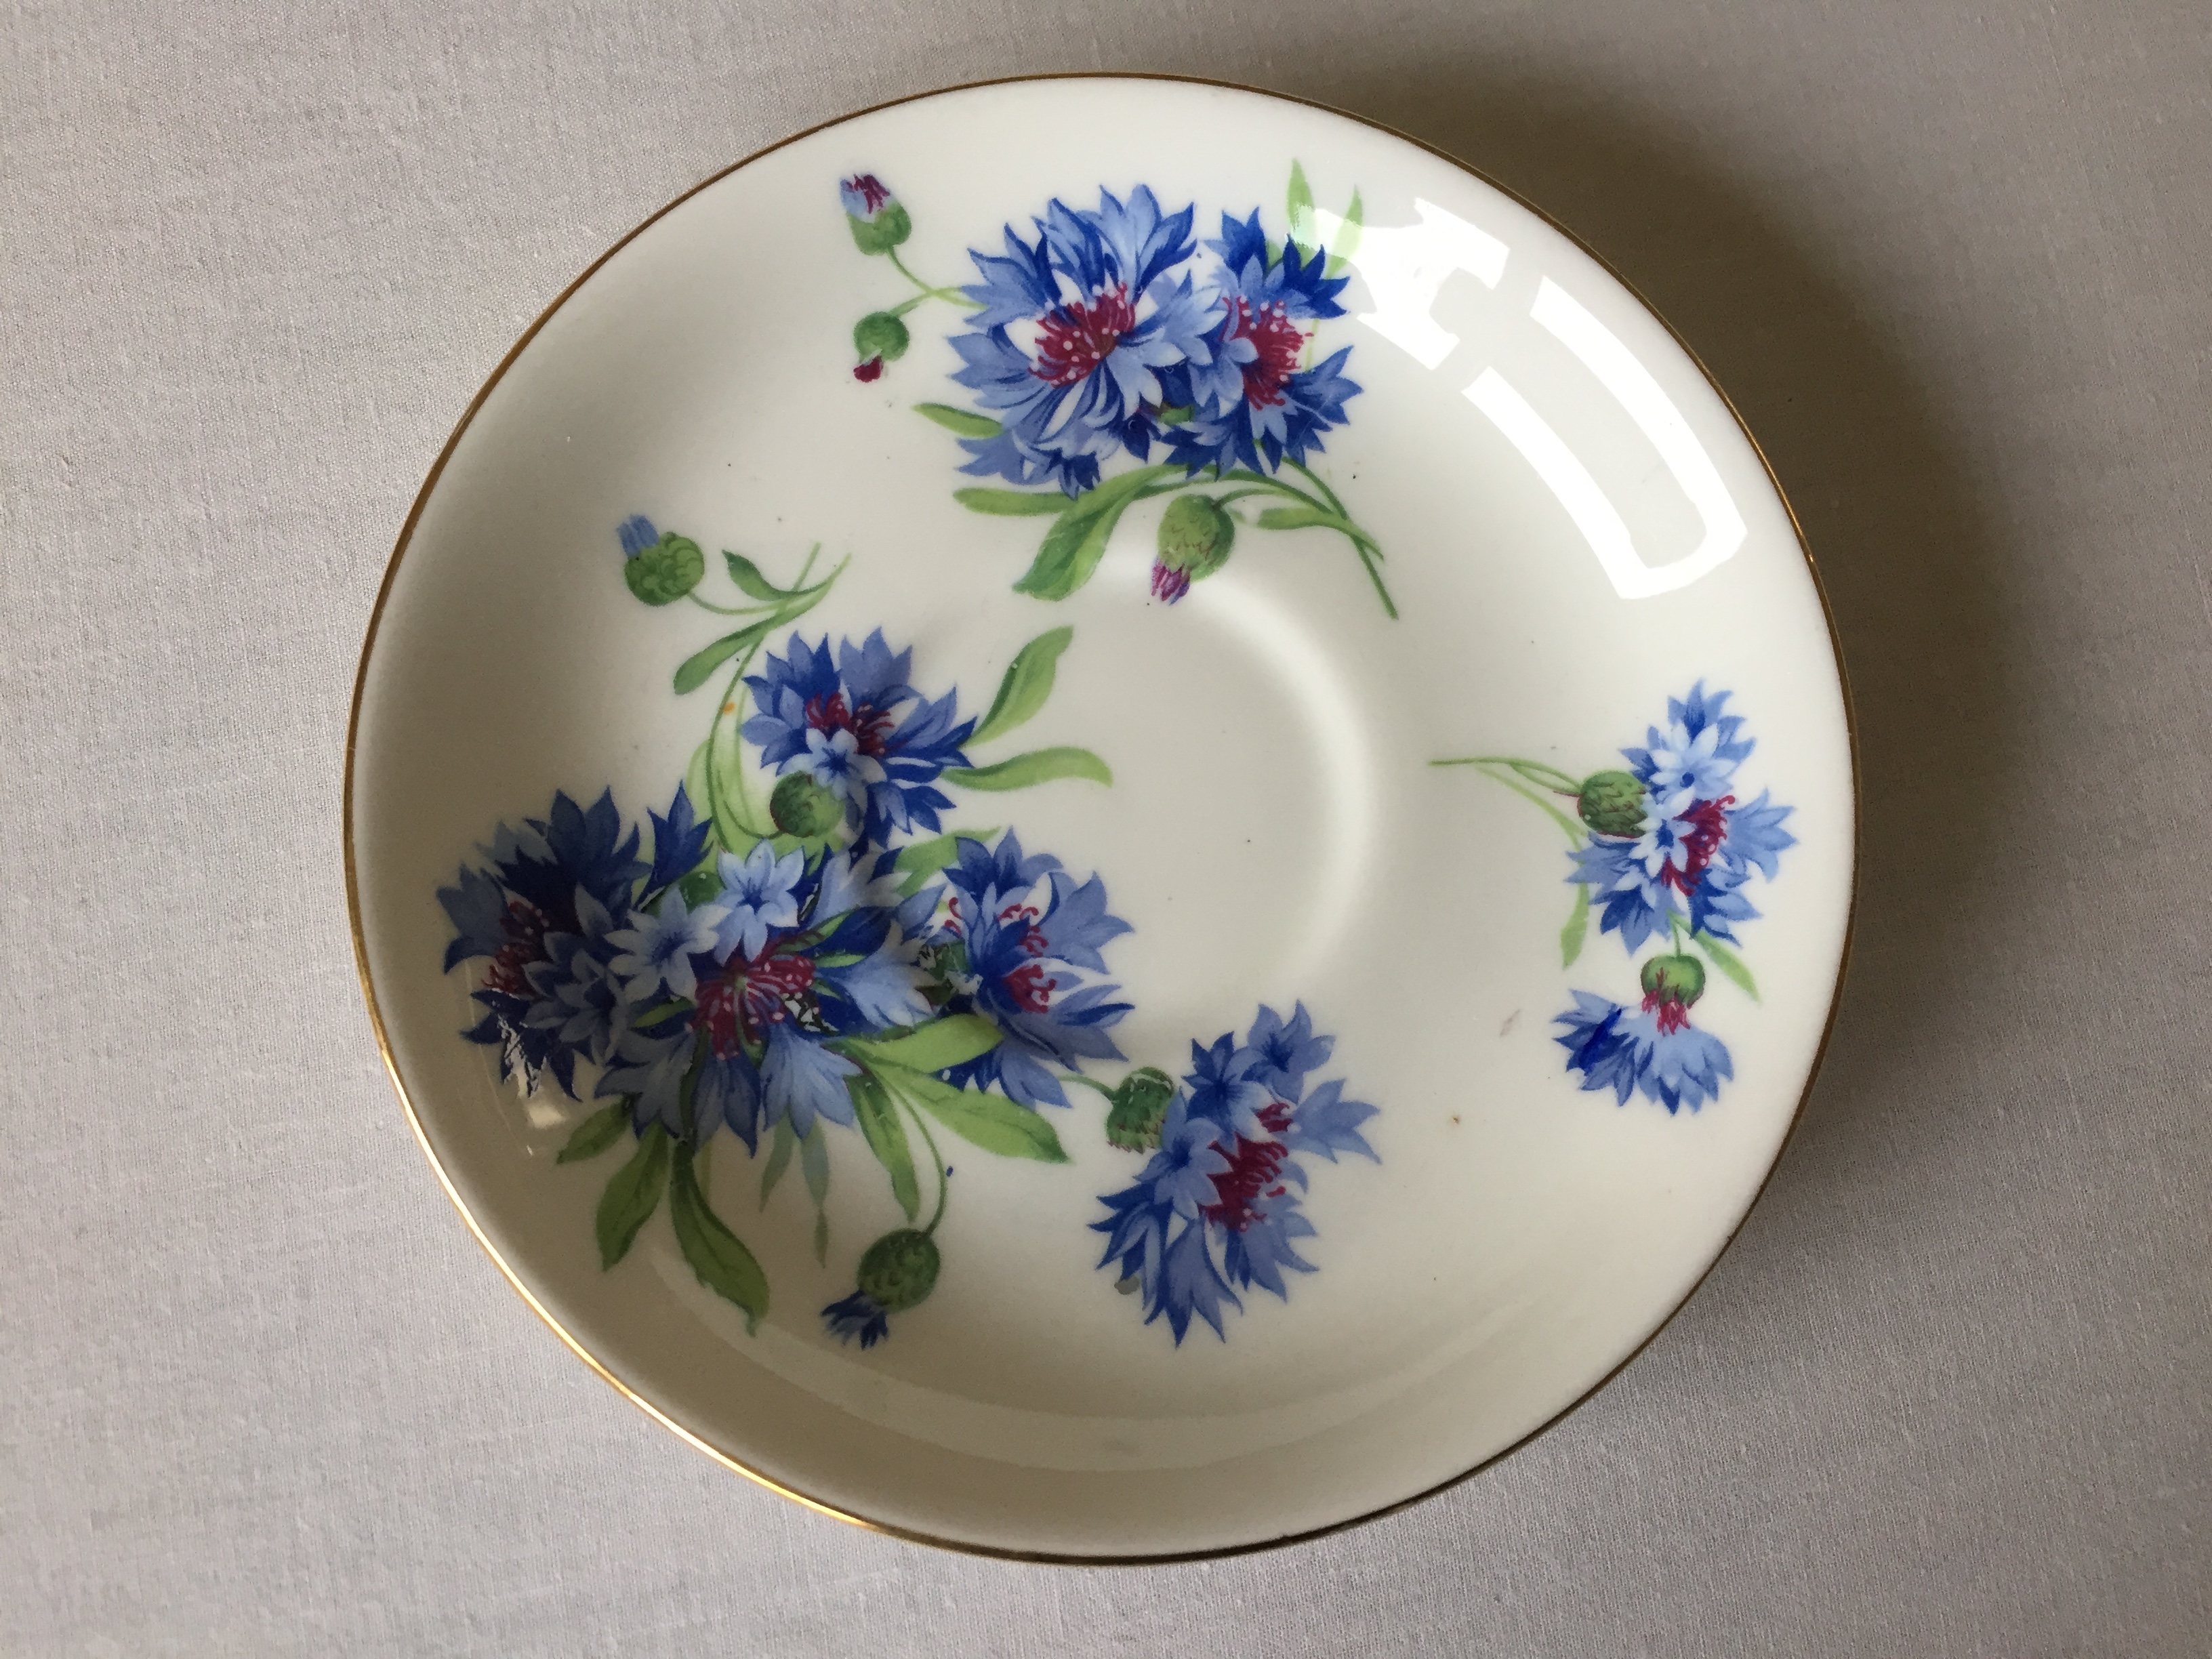 AS USED IN SERICE EARLY STYLE CHINA SAUCER FROM THE PORT LINE SHIPPING COMPANY